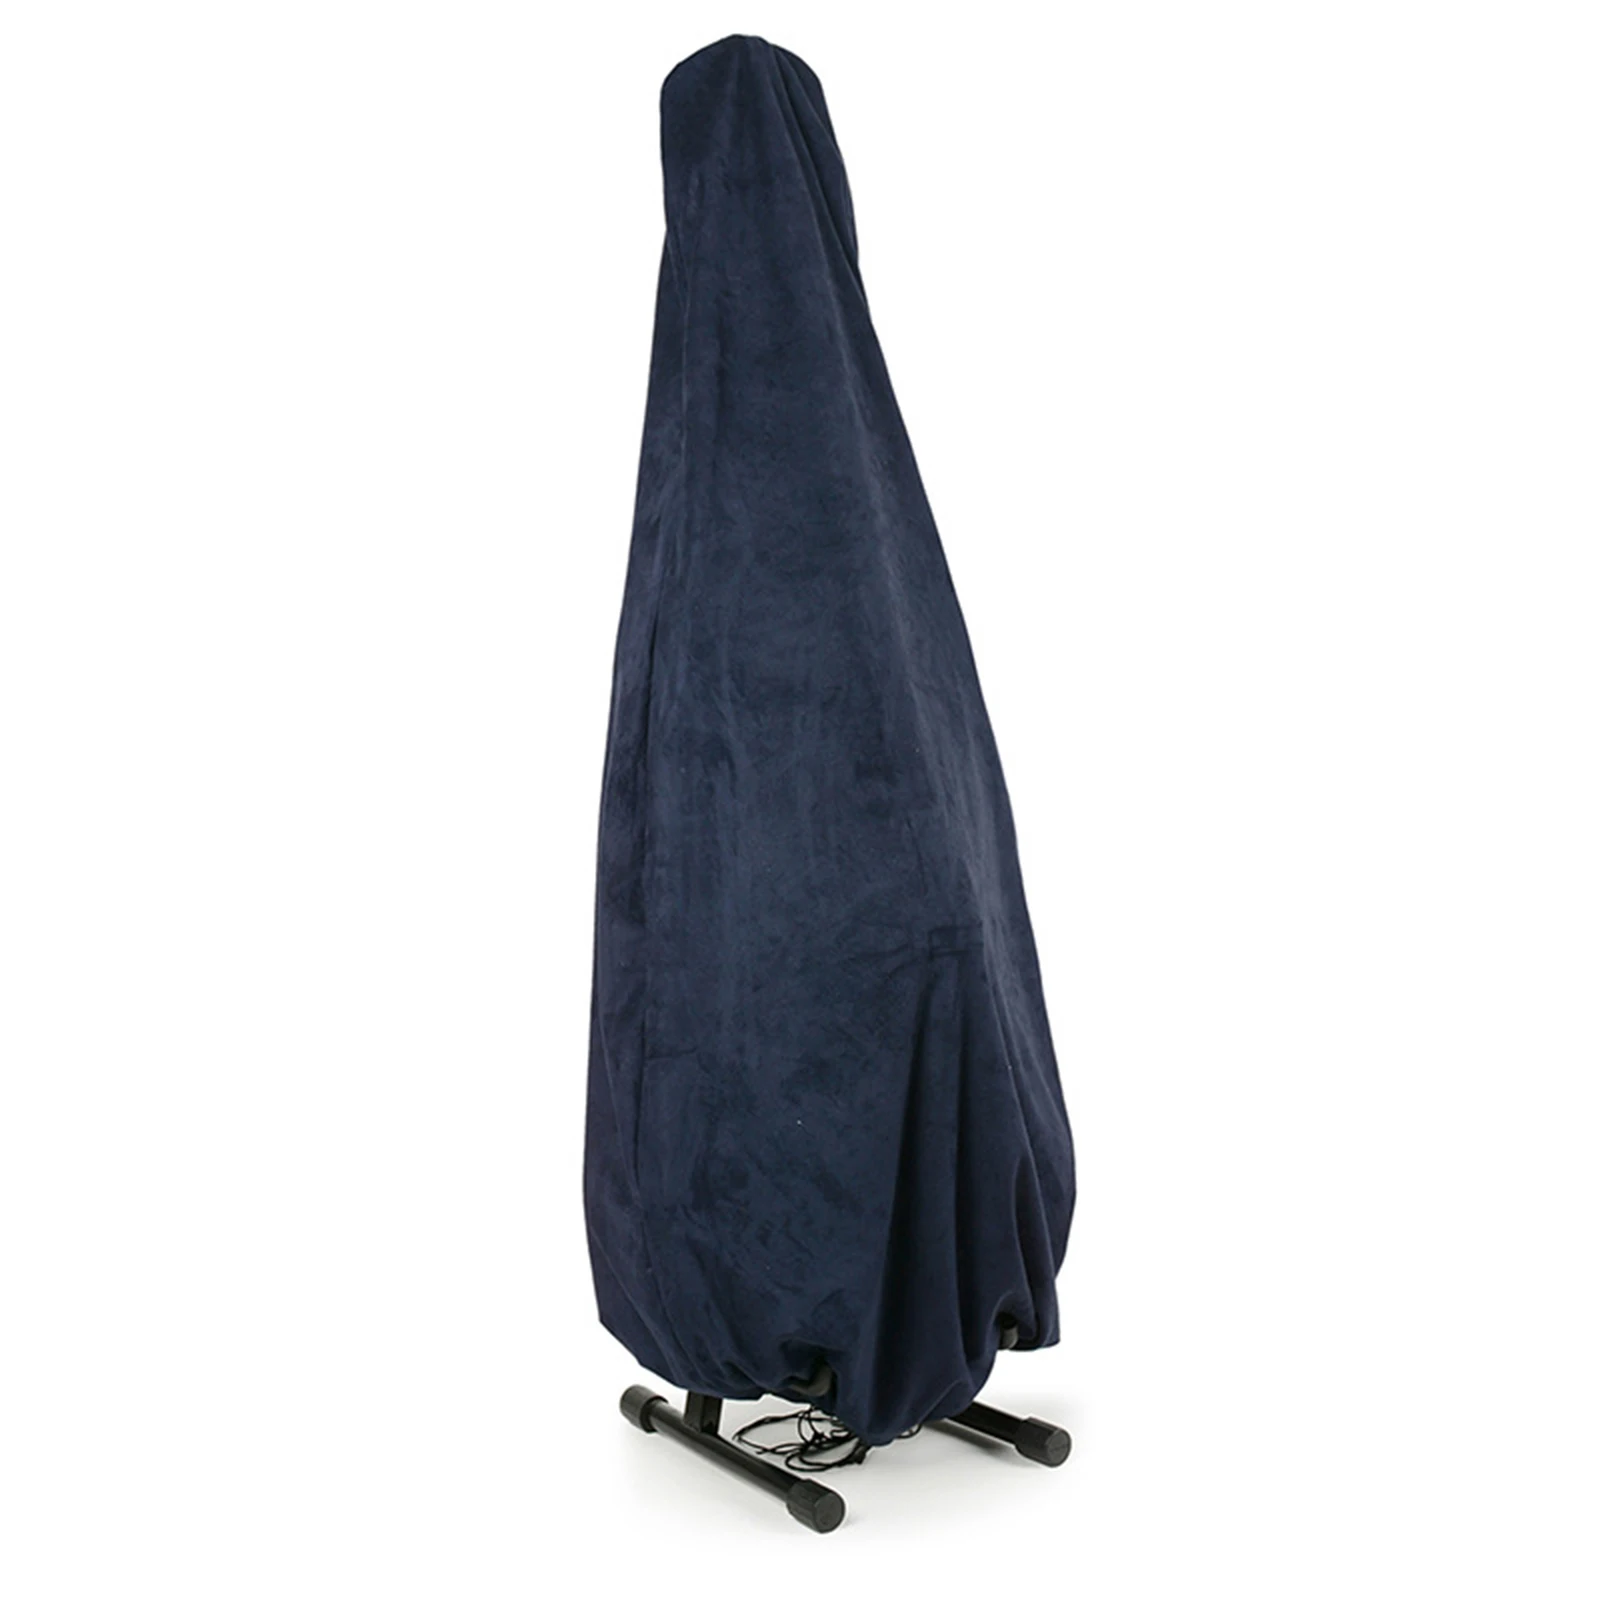 Cloth Cello Dust-proof Cover Protective Bag Drawstring Design Protector Sleeve Against Dirt